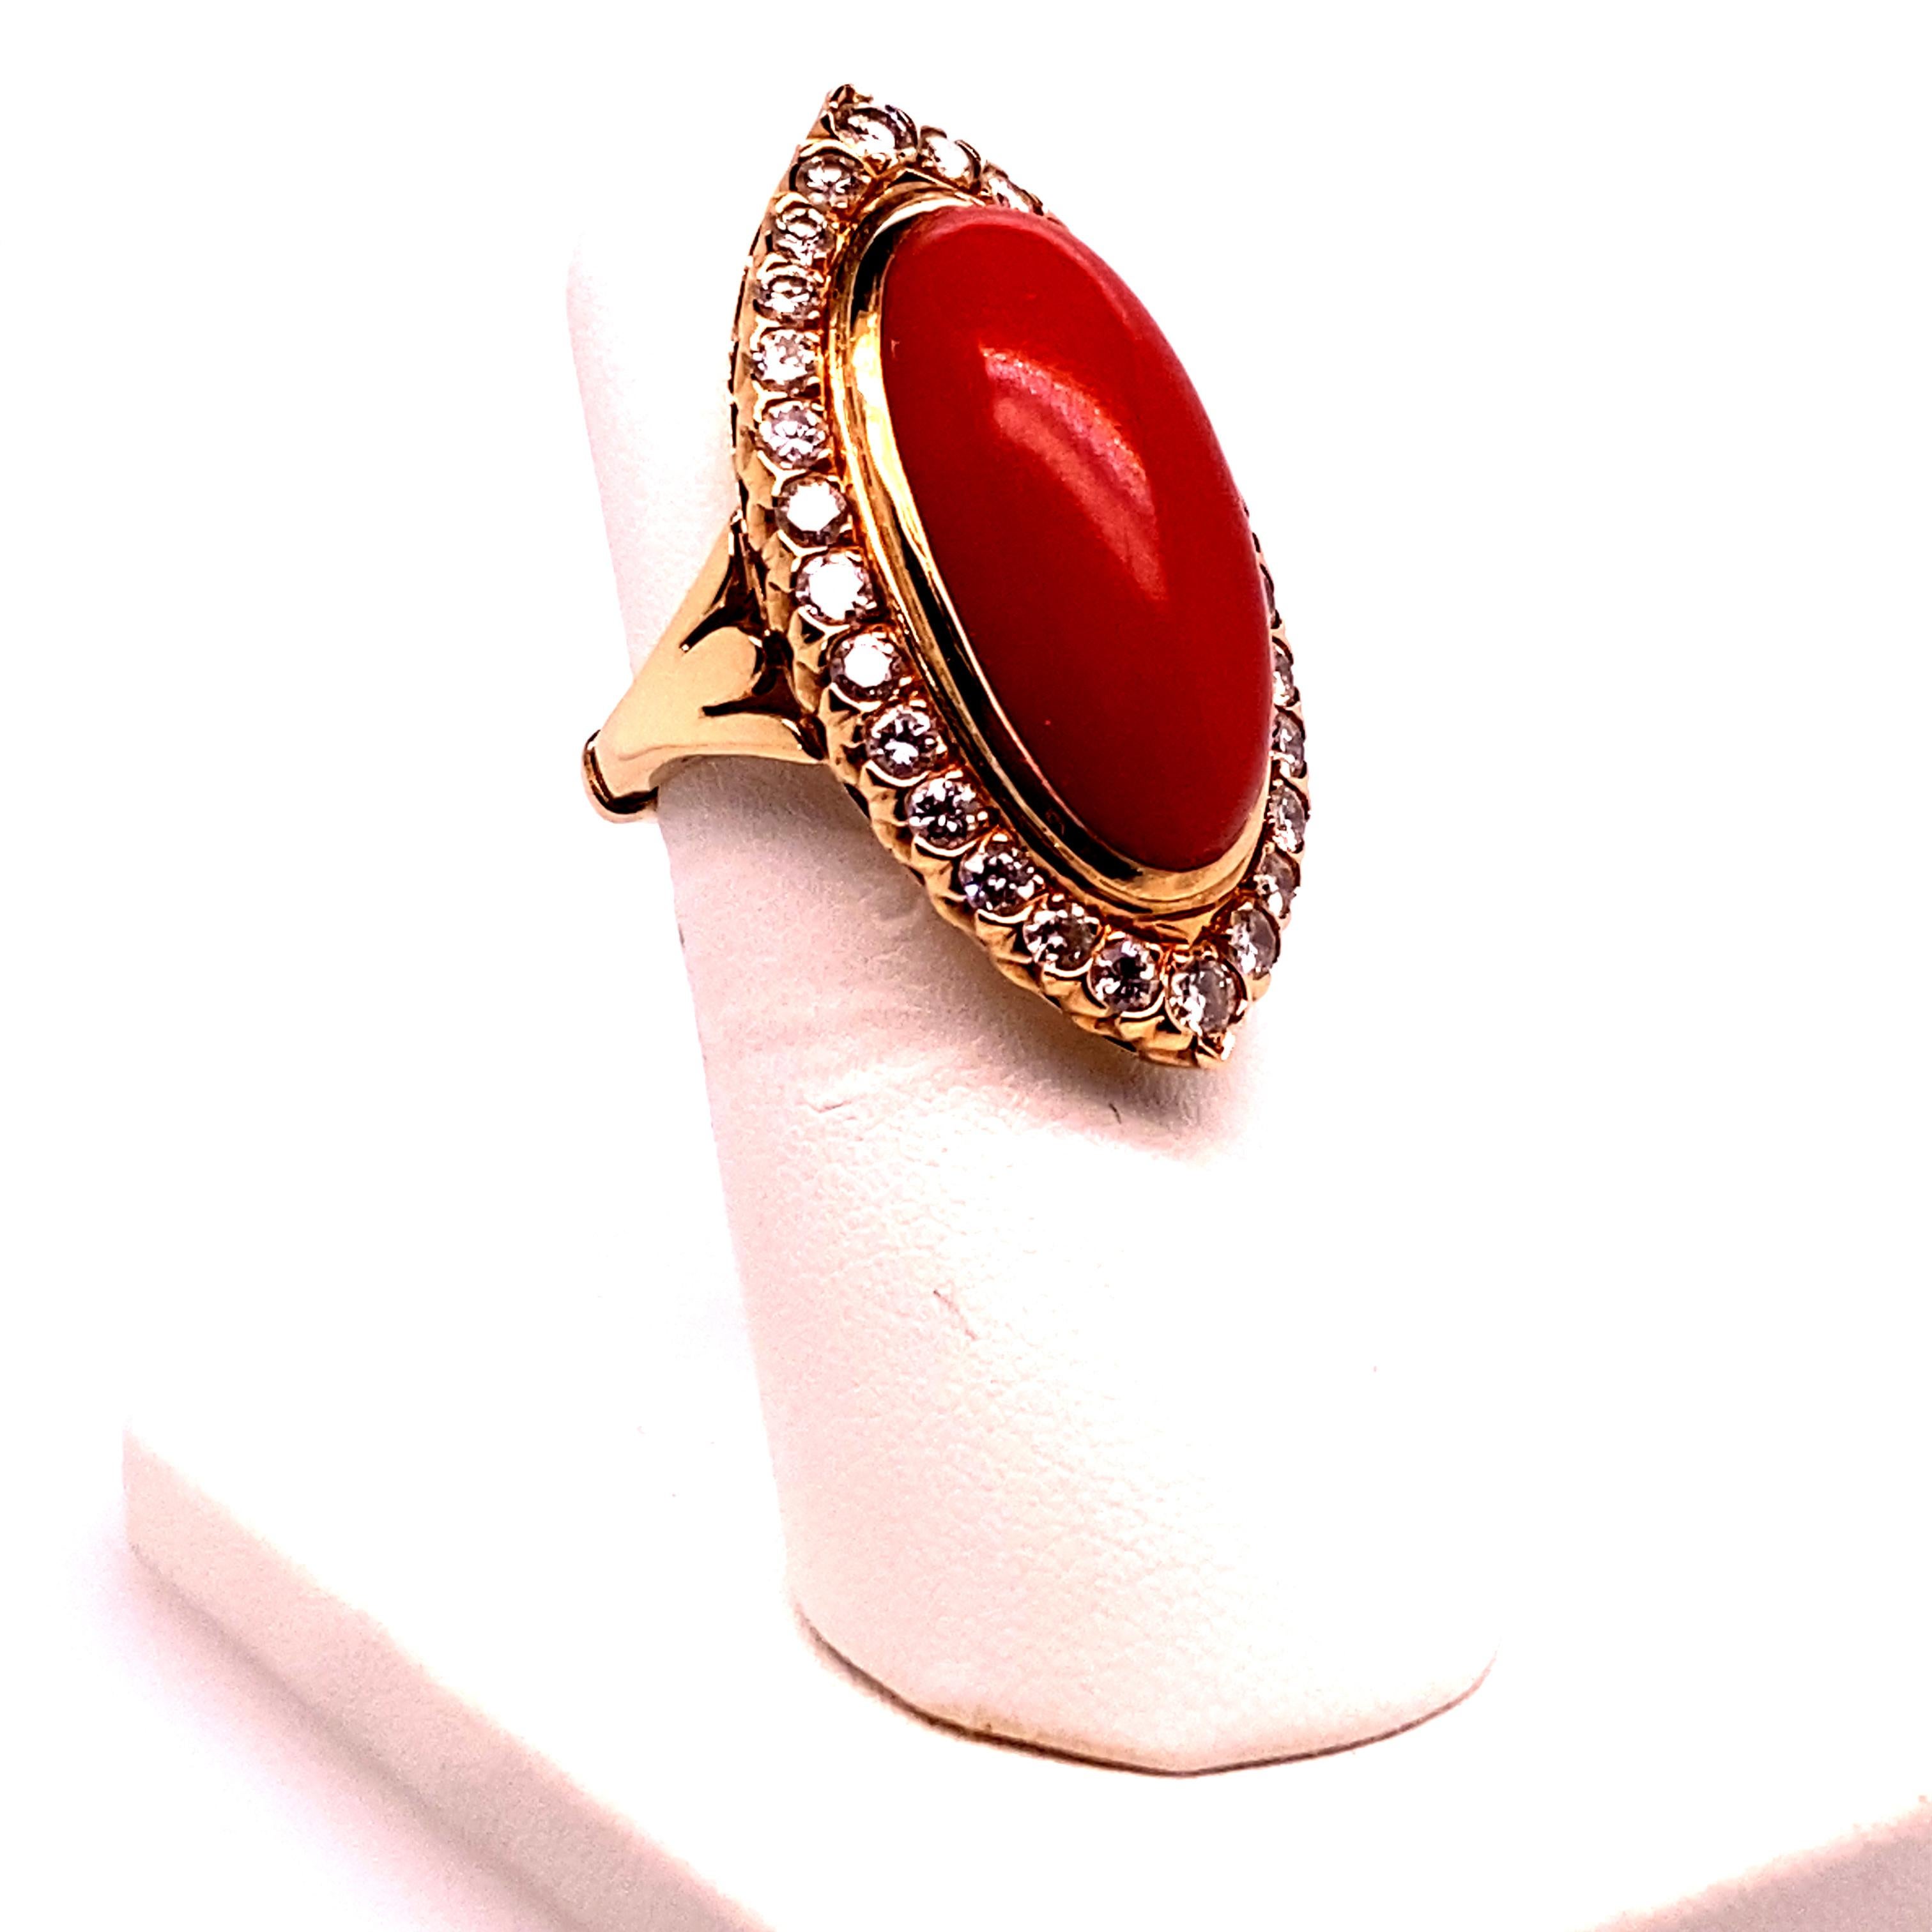 14kt Yellow gold vintage ring from Italy.  Featuring one oval cut red coral cabachon measuring aproxiamtely 22x12mm and twenty eight round, full cut diamonds weighing aproximate;y 1,50 cts total.  Color grade G-H, clarity grade SI1-2.  The ring